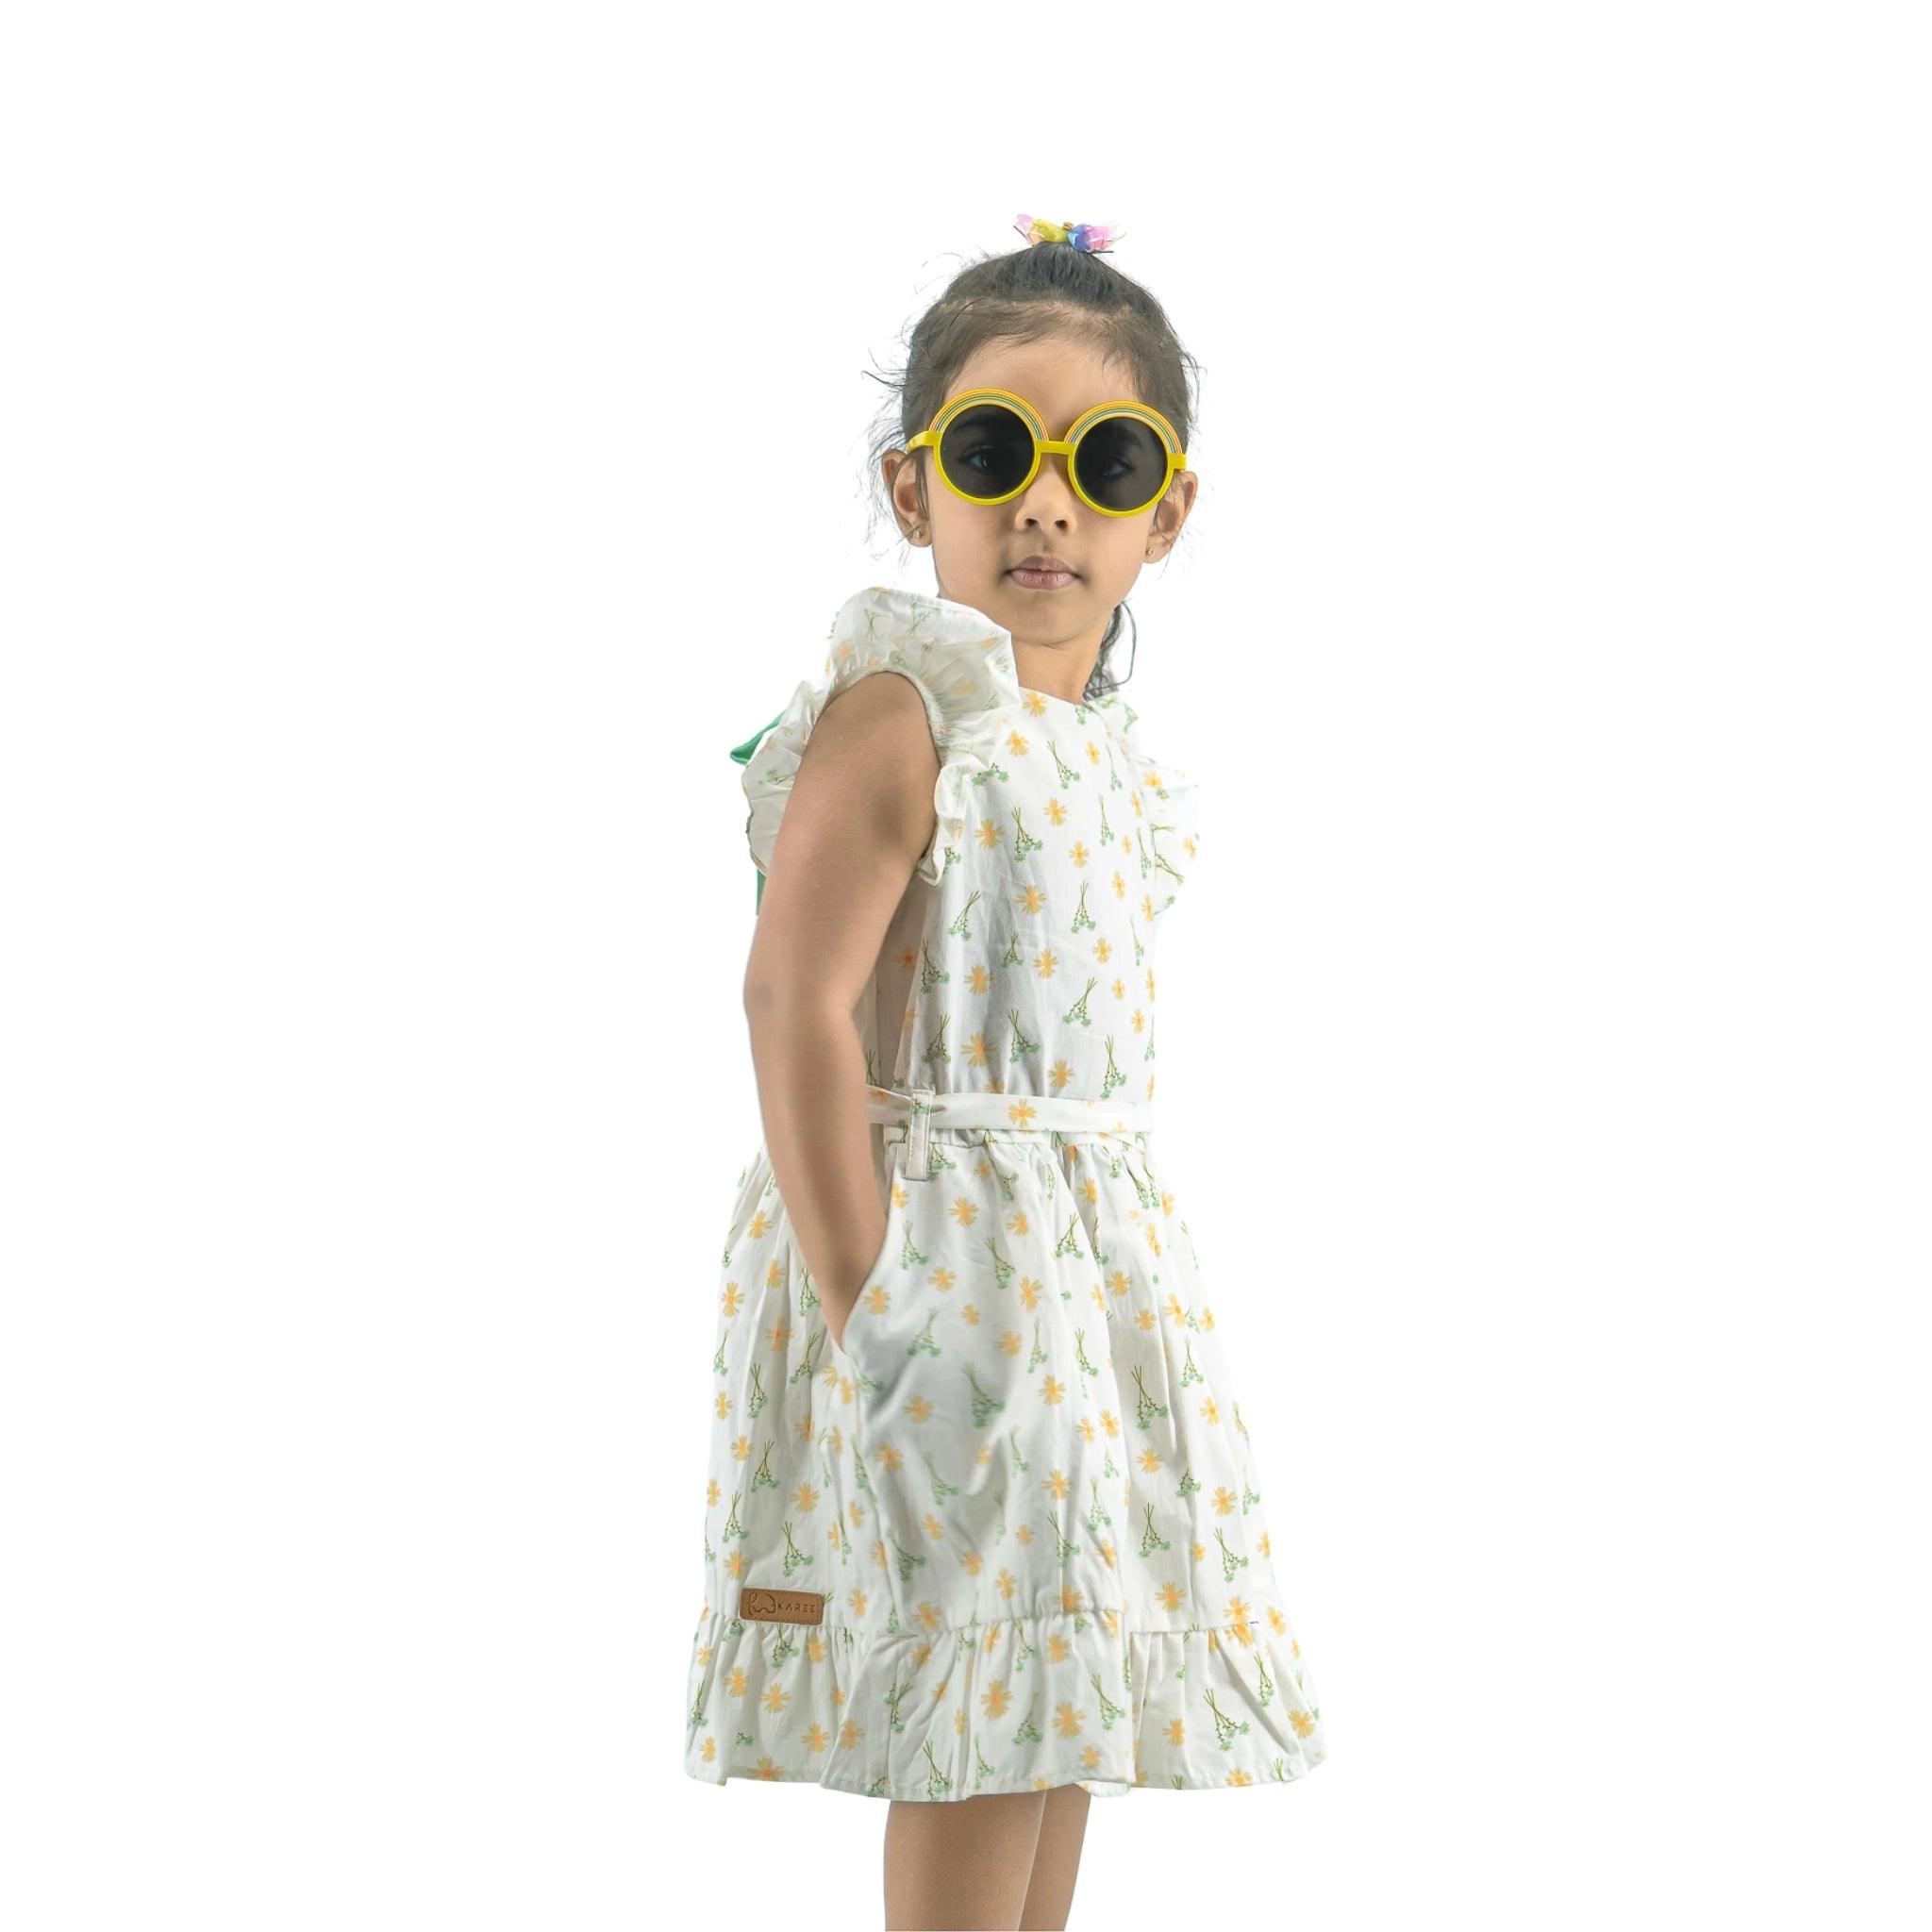 Young girl wearing sunglasses and a Karee Petite Blossom Cotton Dress in Smoked Pearl, looking over her shoulder, isolated on a white background.